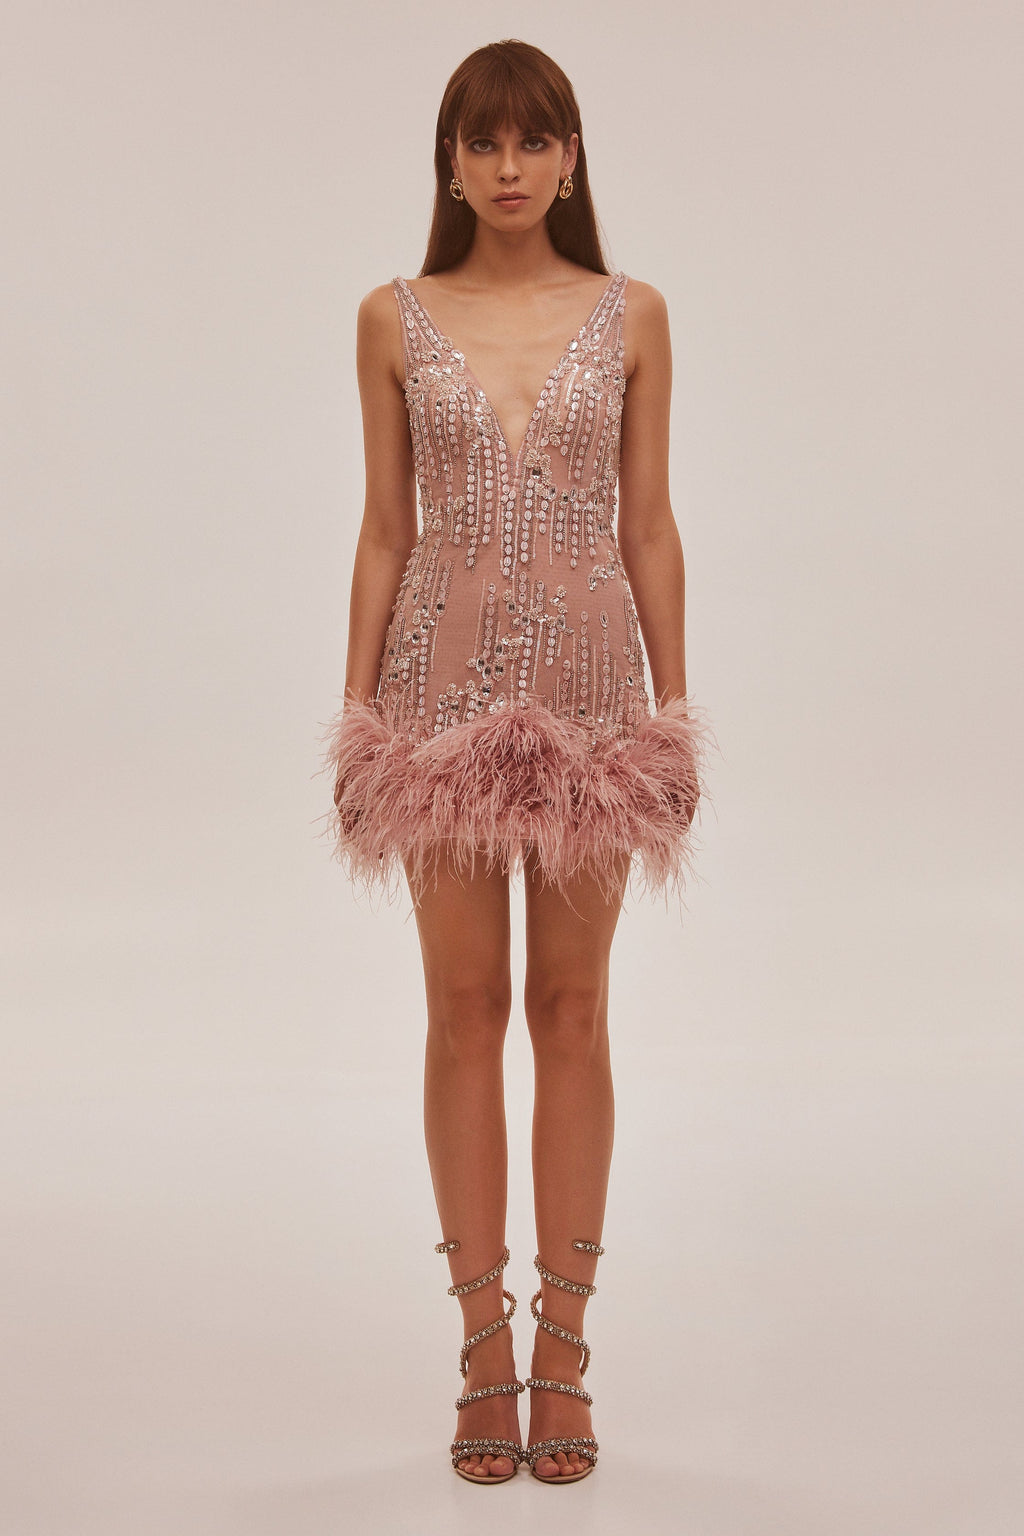 Fabulous mini dress on straps adorned with crystals and feathers